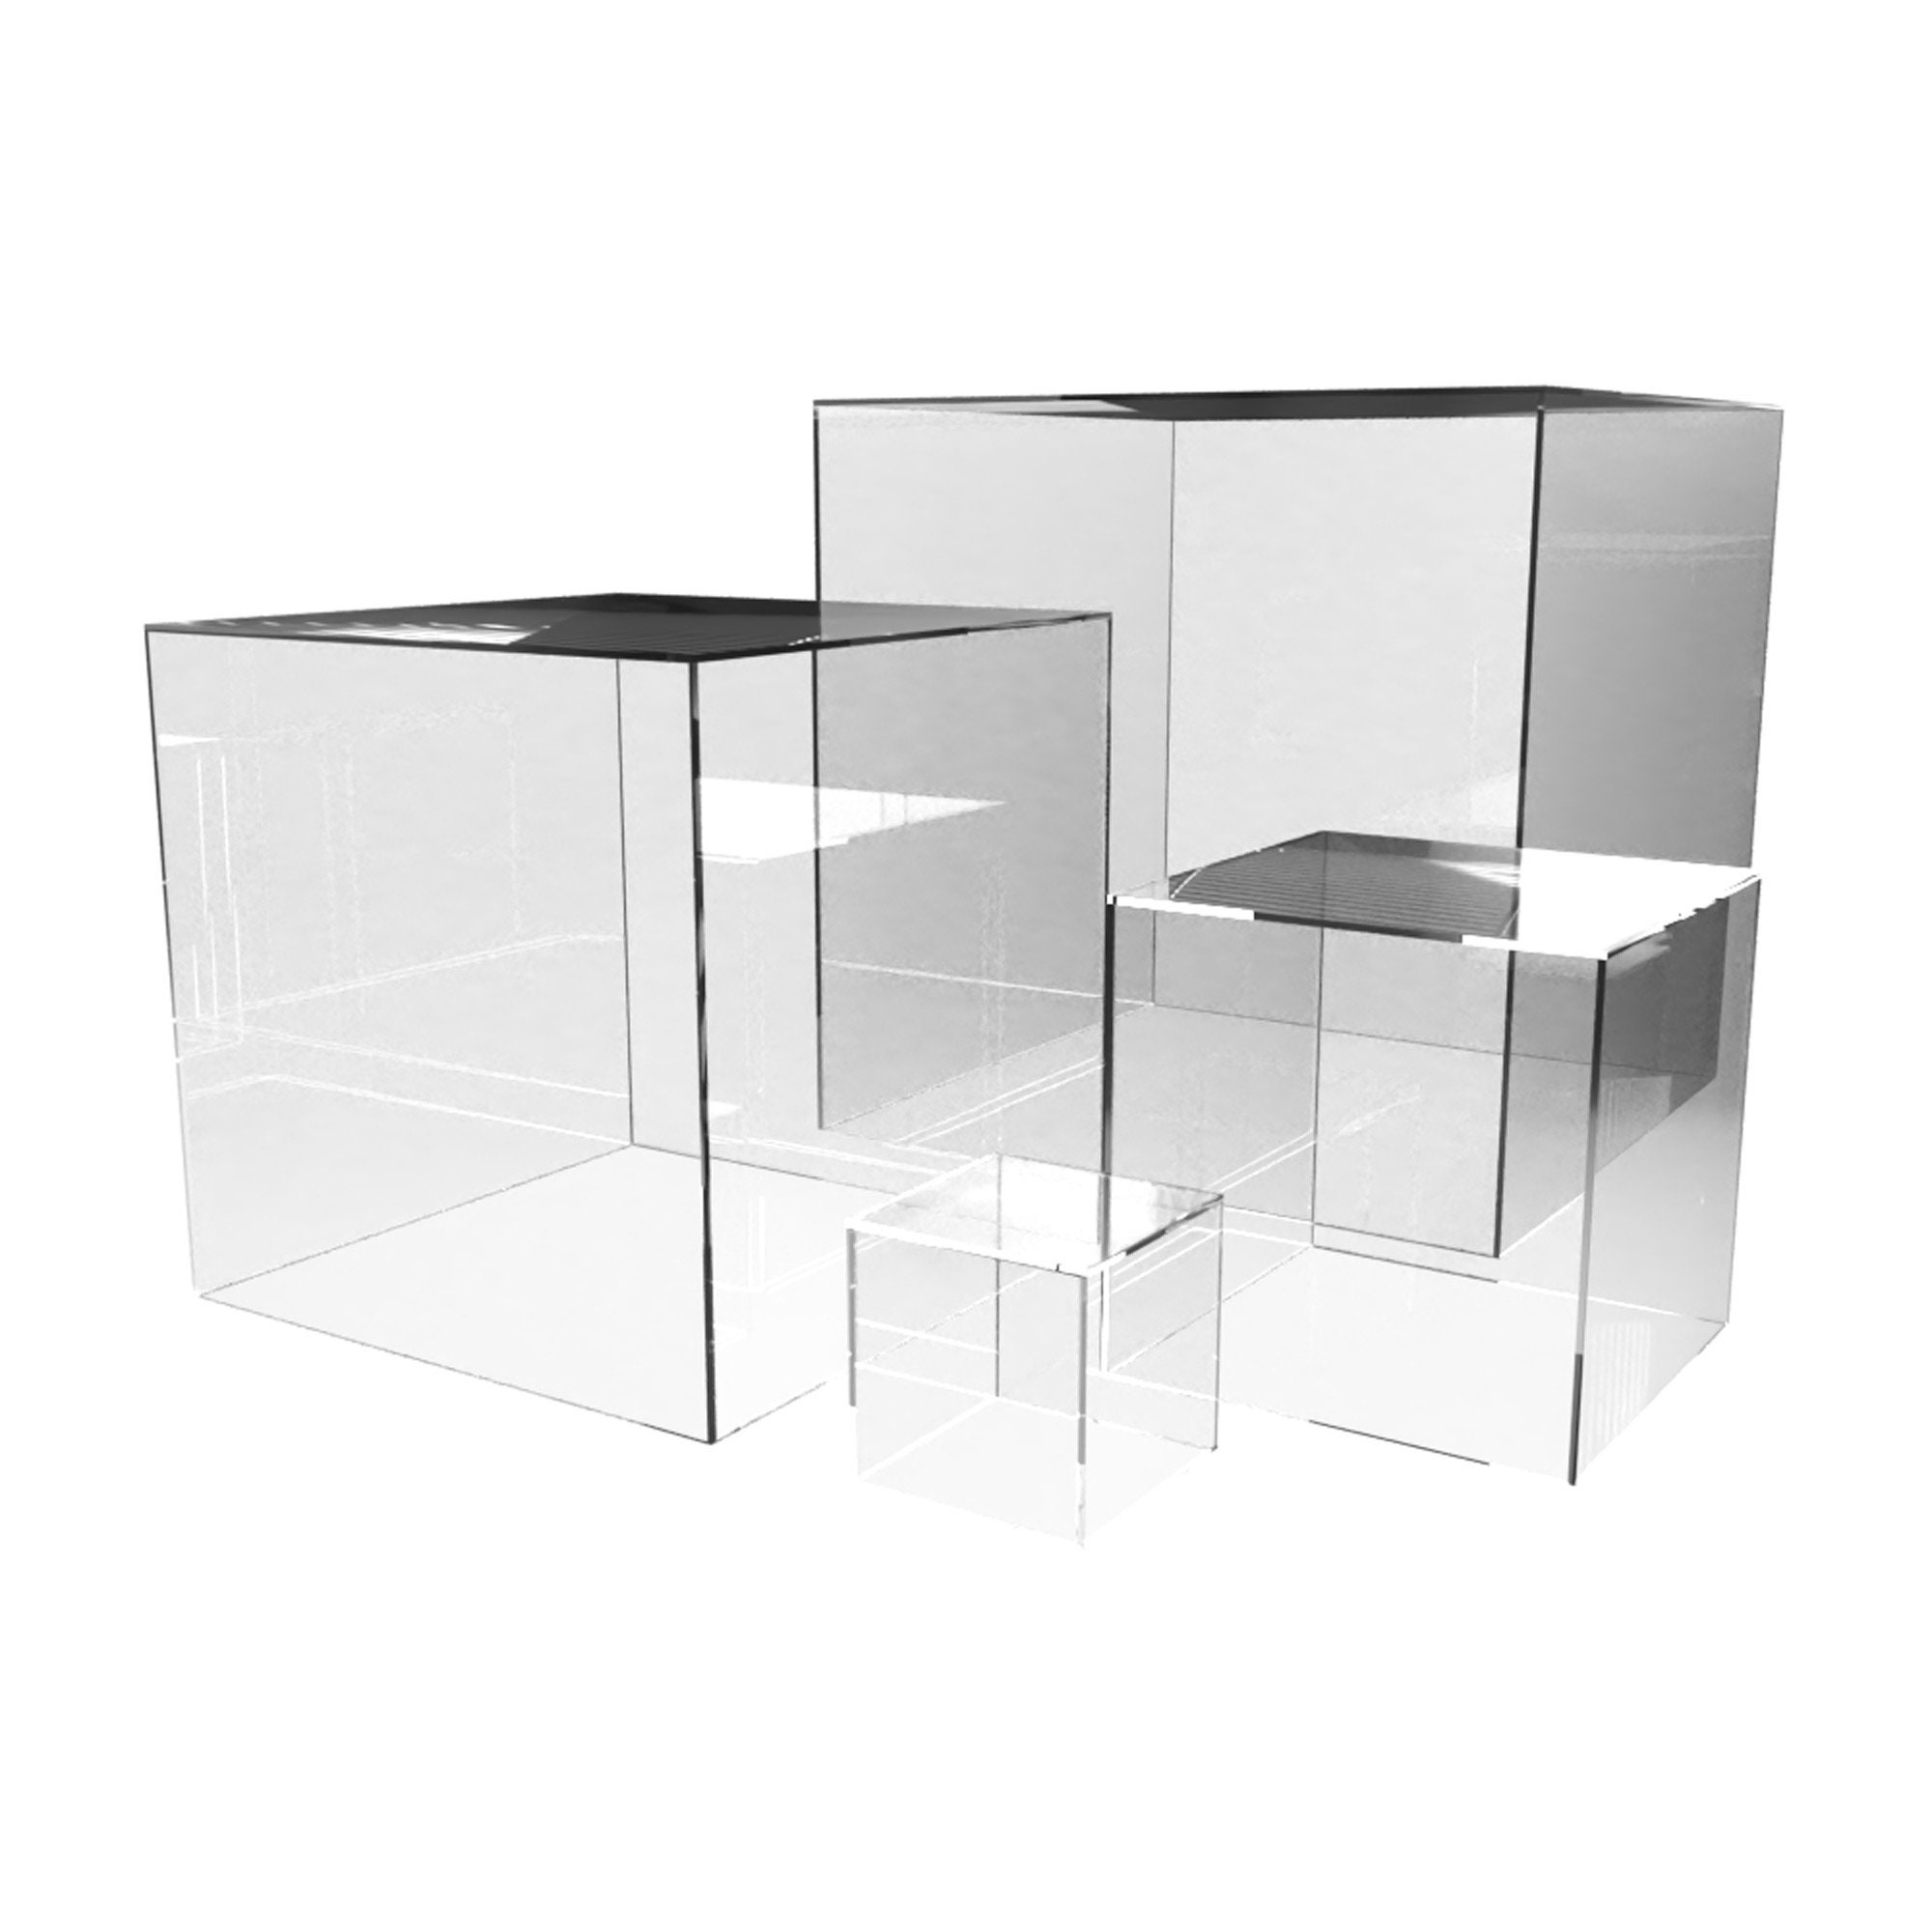 Acrylic Plastic Perspex Cube Display Stand 5 Sided Box Black Retail Shop Tray 